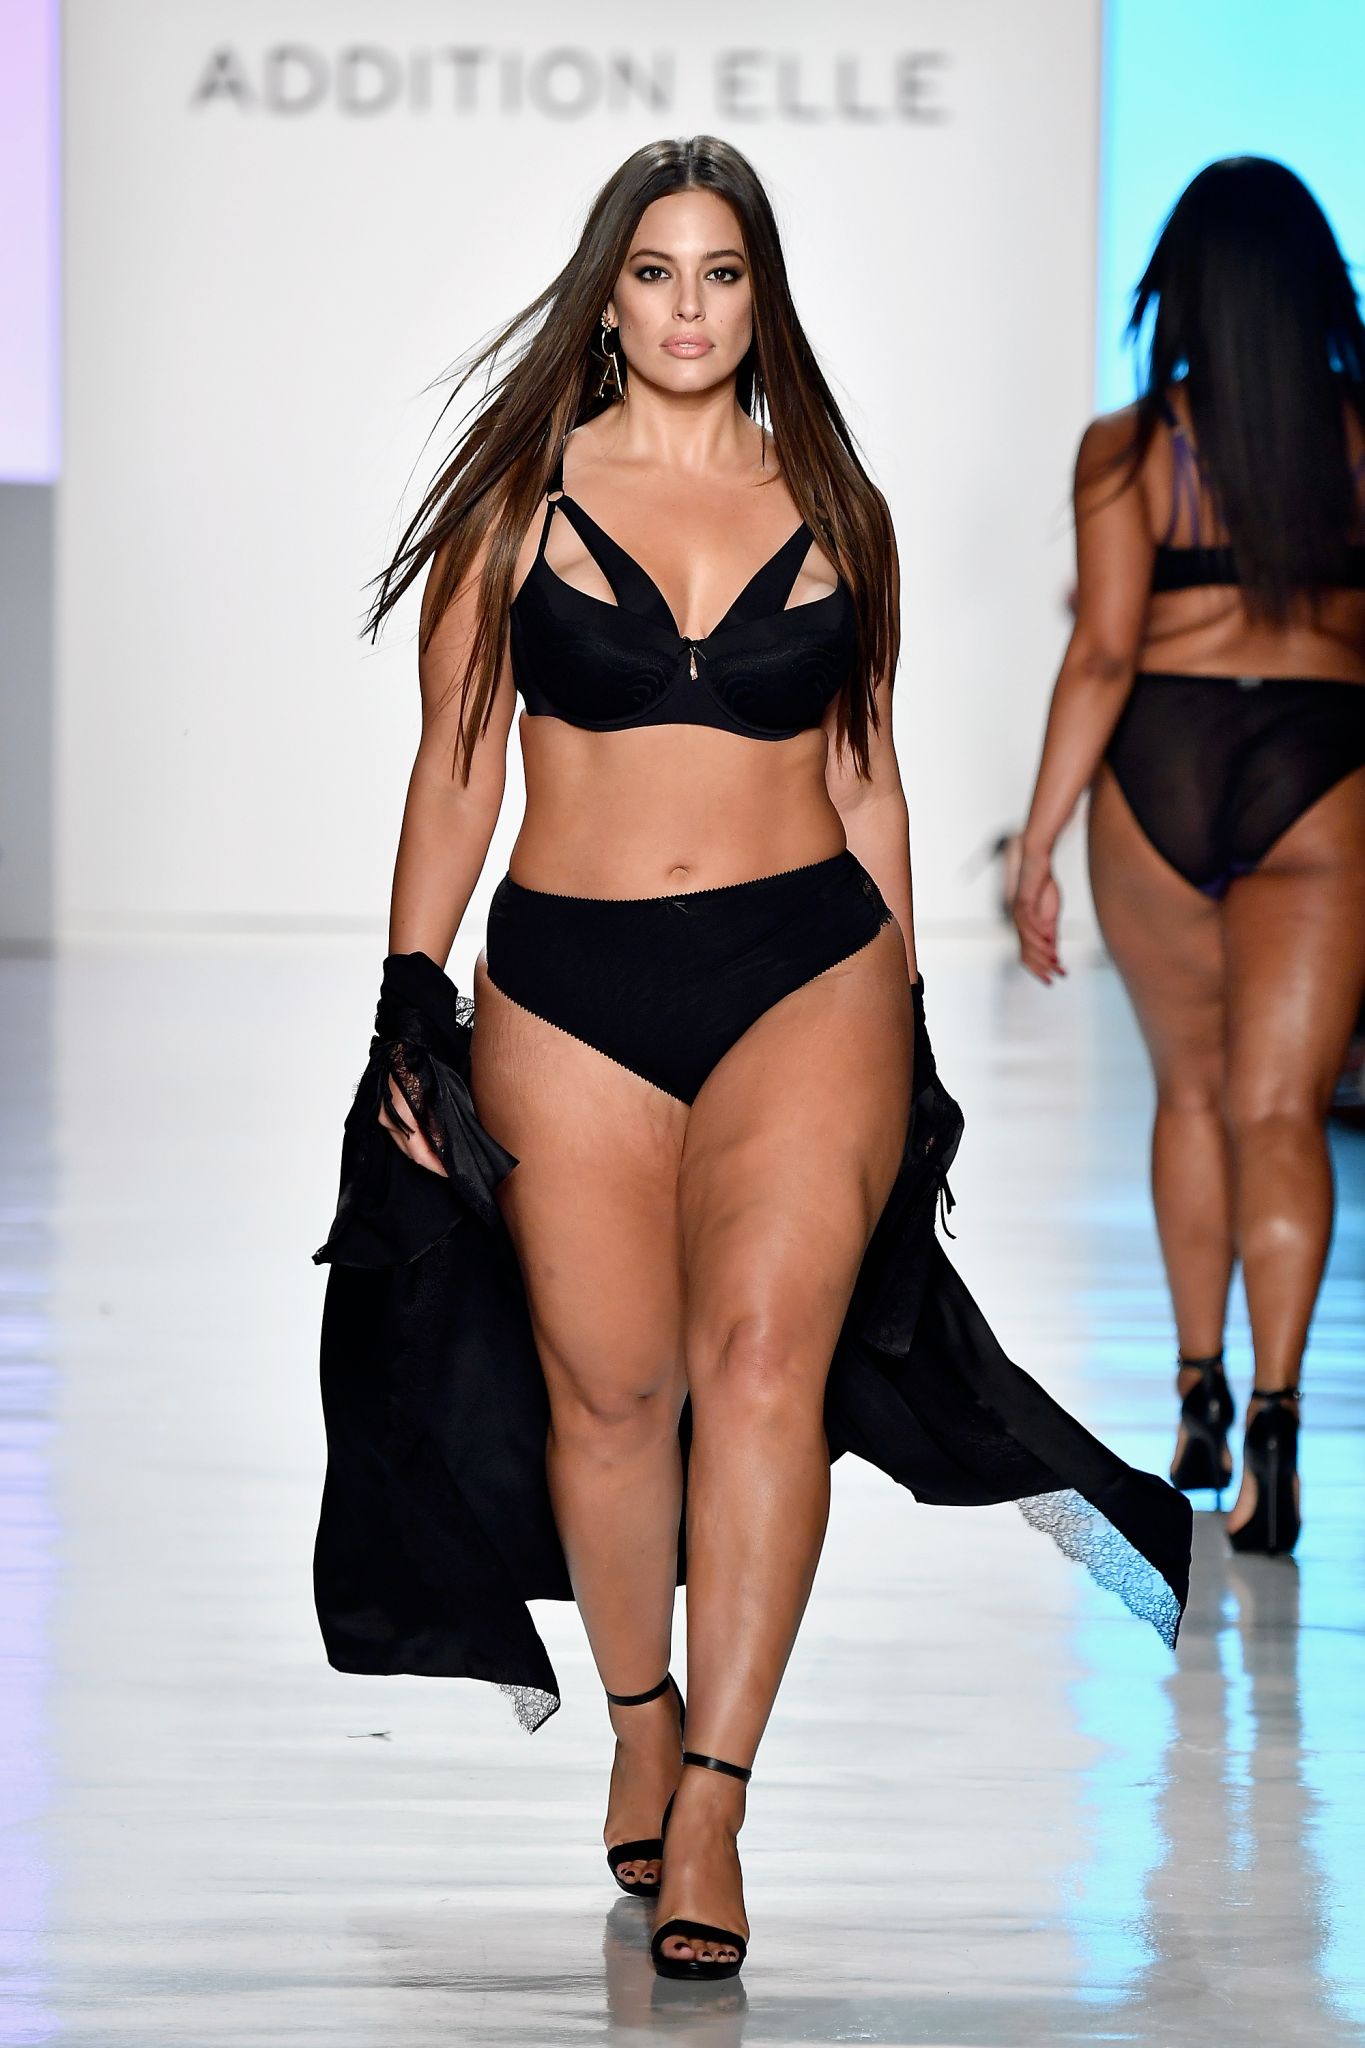 Plus Size Model Casting Call To Take Place In Houston